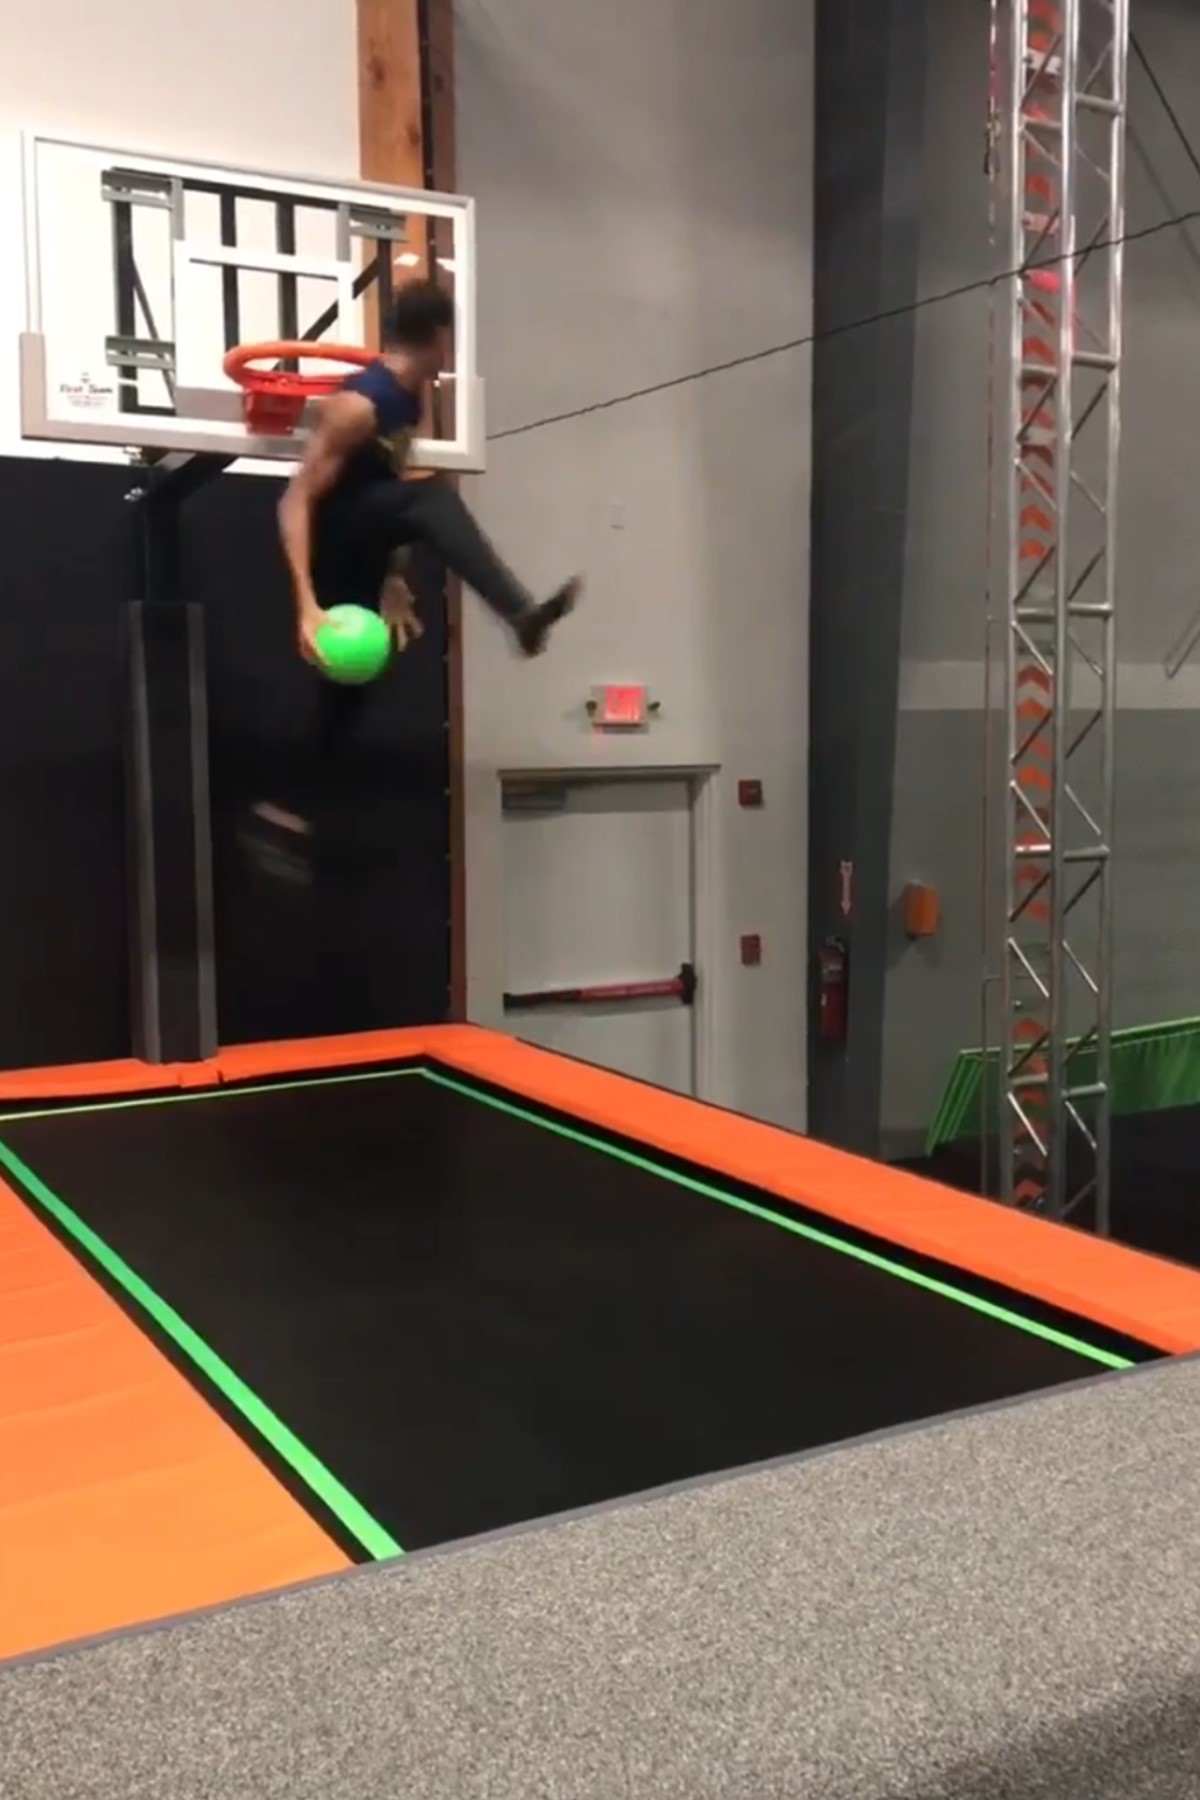 Person dunking a basketball into a hoop